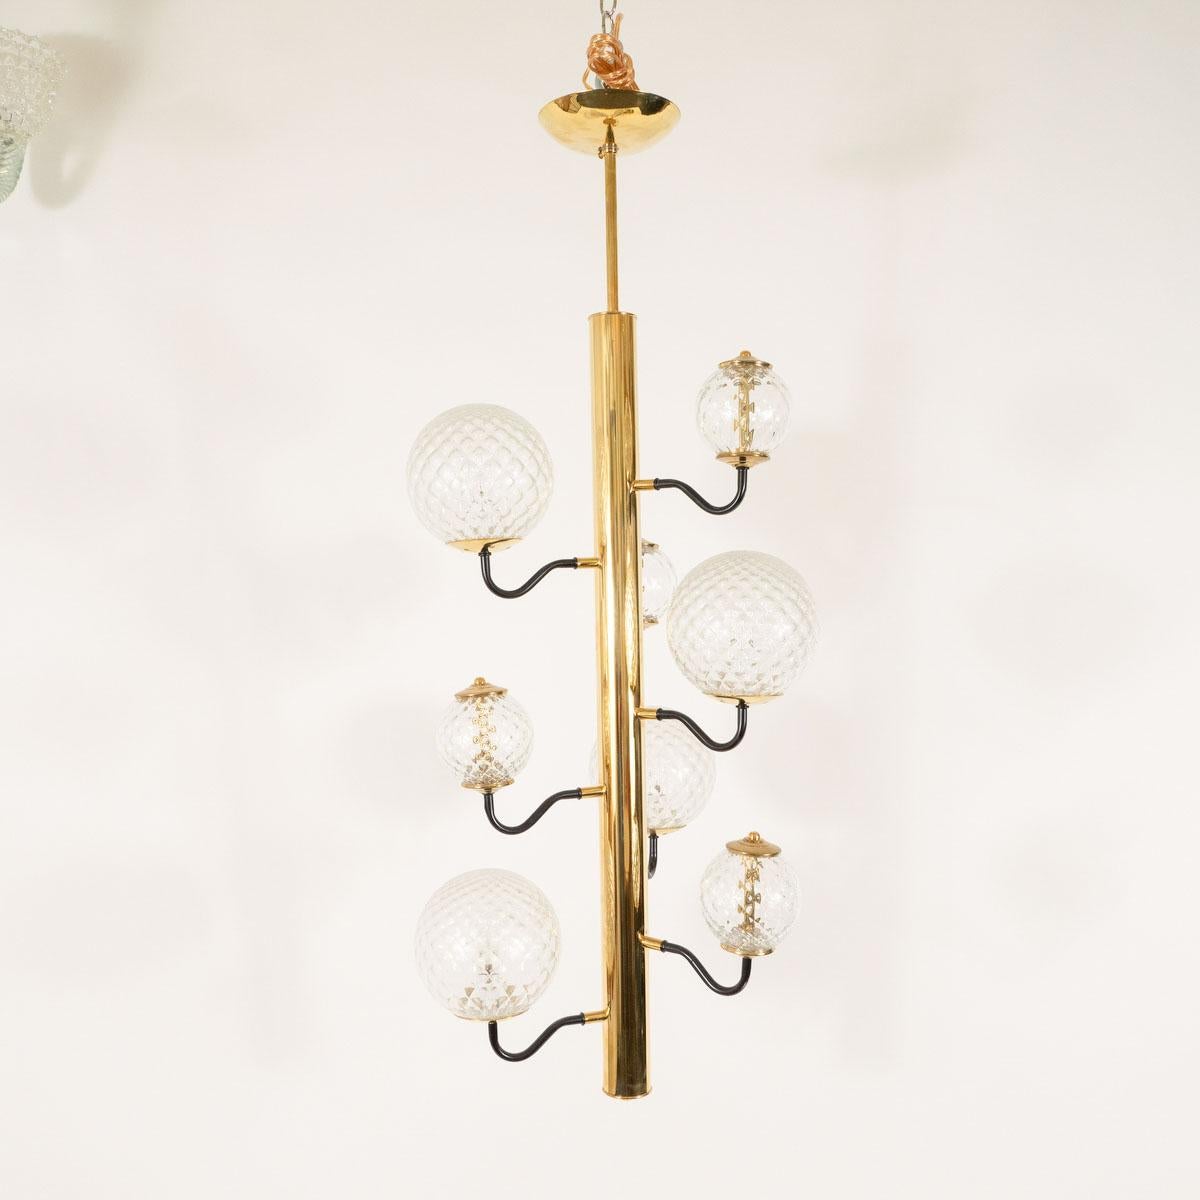 Columnar Brass Chandelier with Glass Globes In Good Condition For Sale In Tarrytown, NY